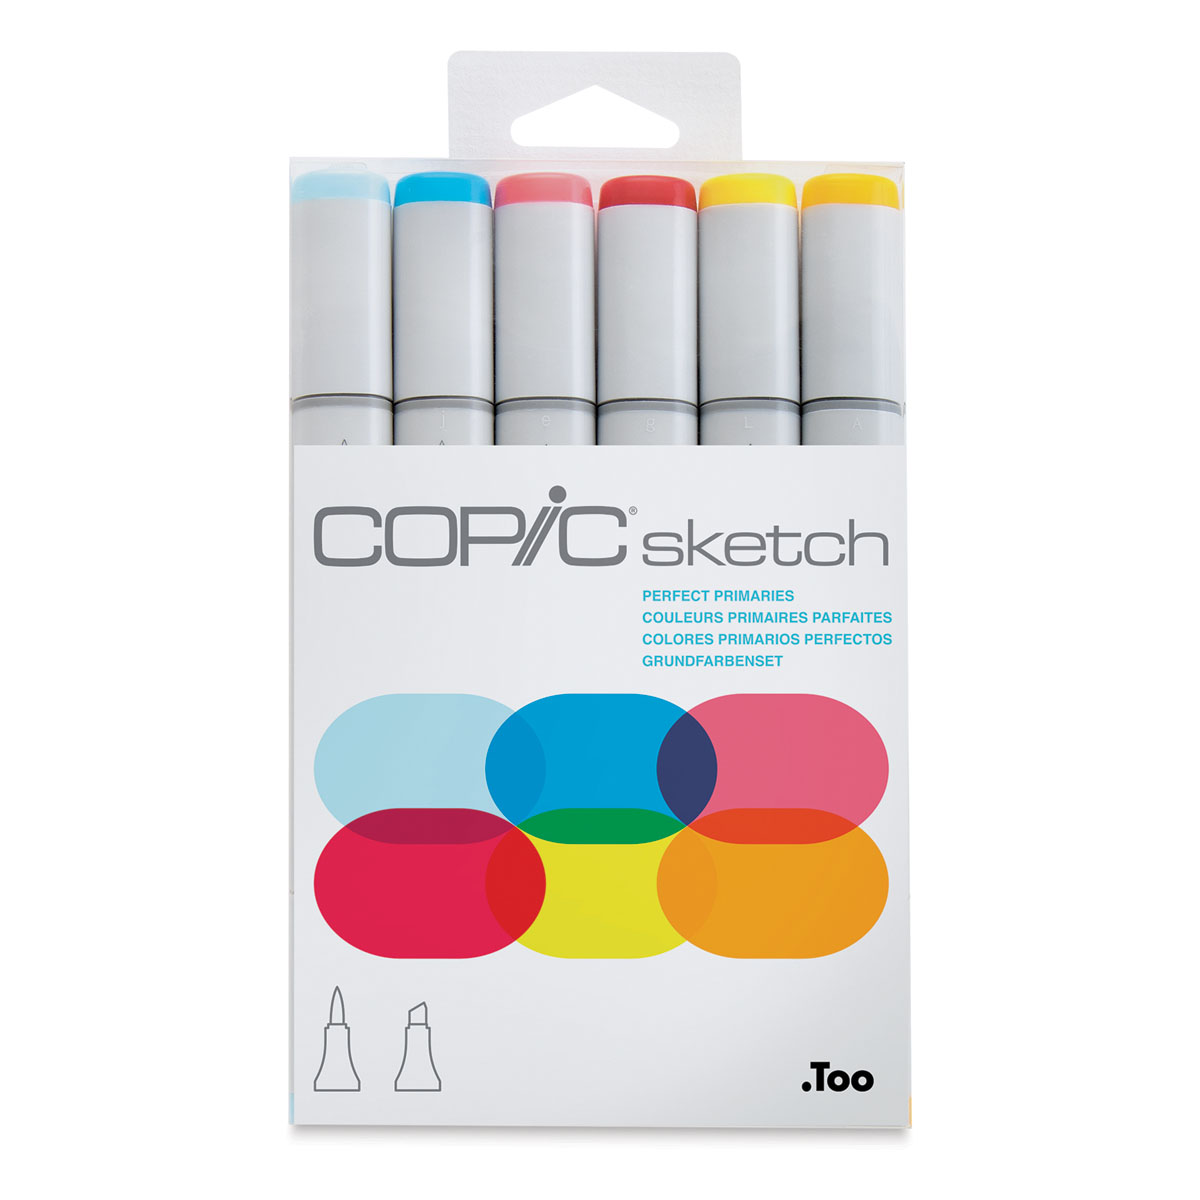 japan Copic Sketch markers,Copic Alcohol Sketch Marker Set, Earth  Essentials, 6 Count,Oval barrel designed for comfort Two Nibs - AliExpress